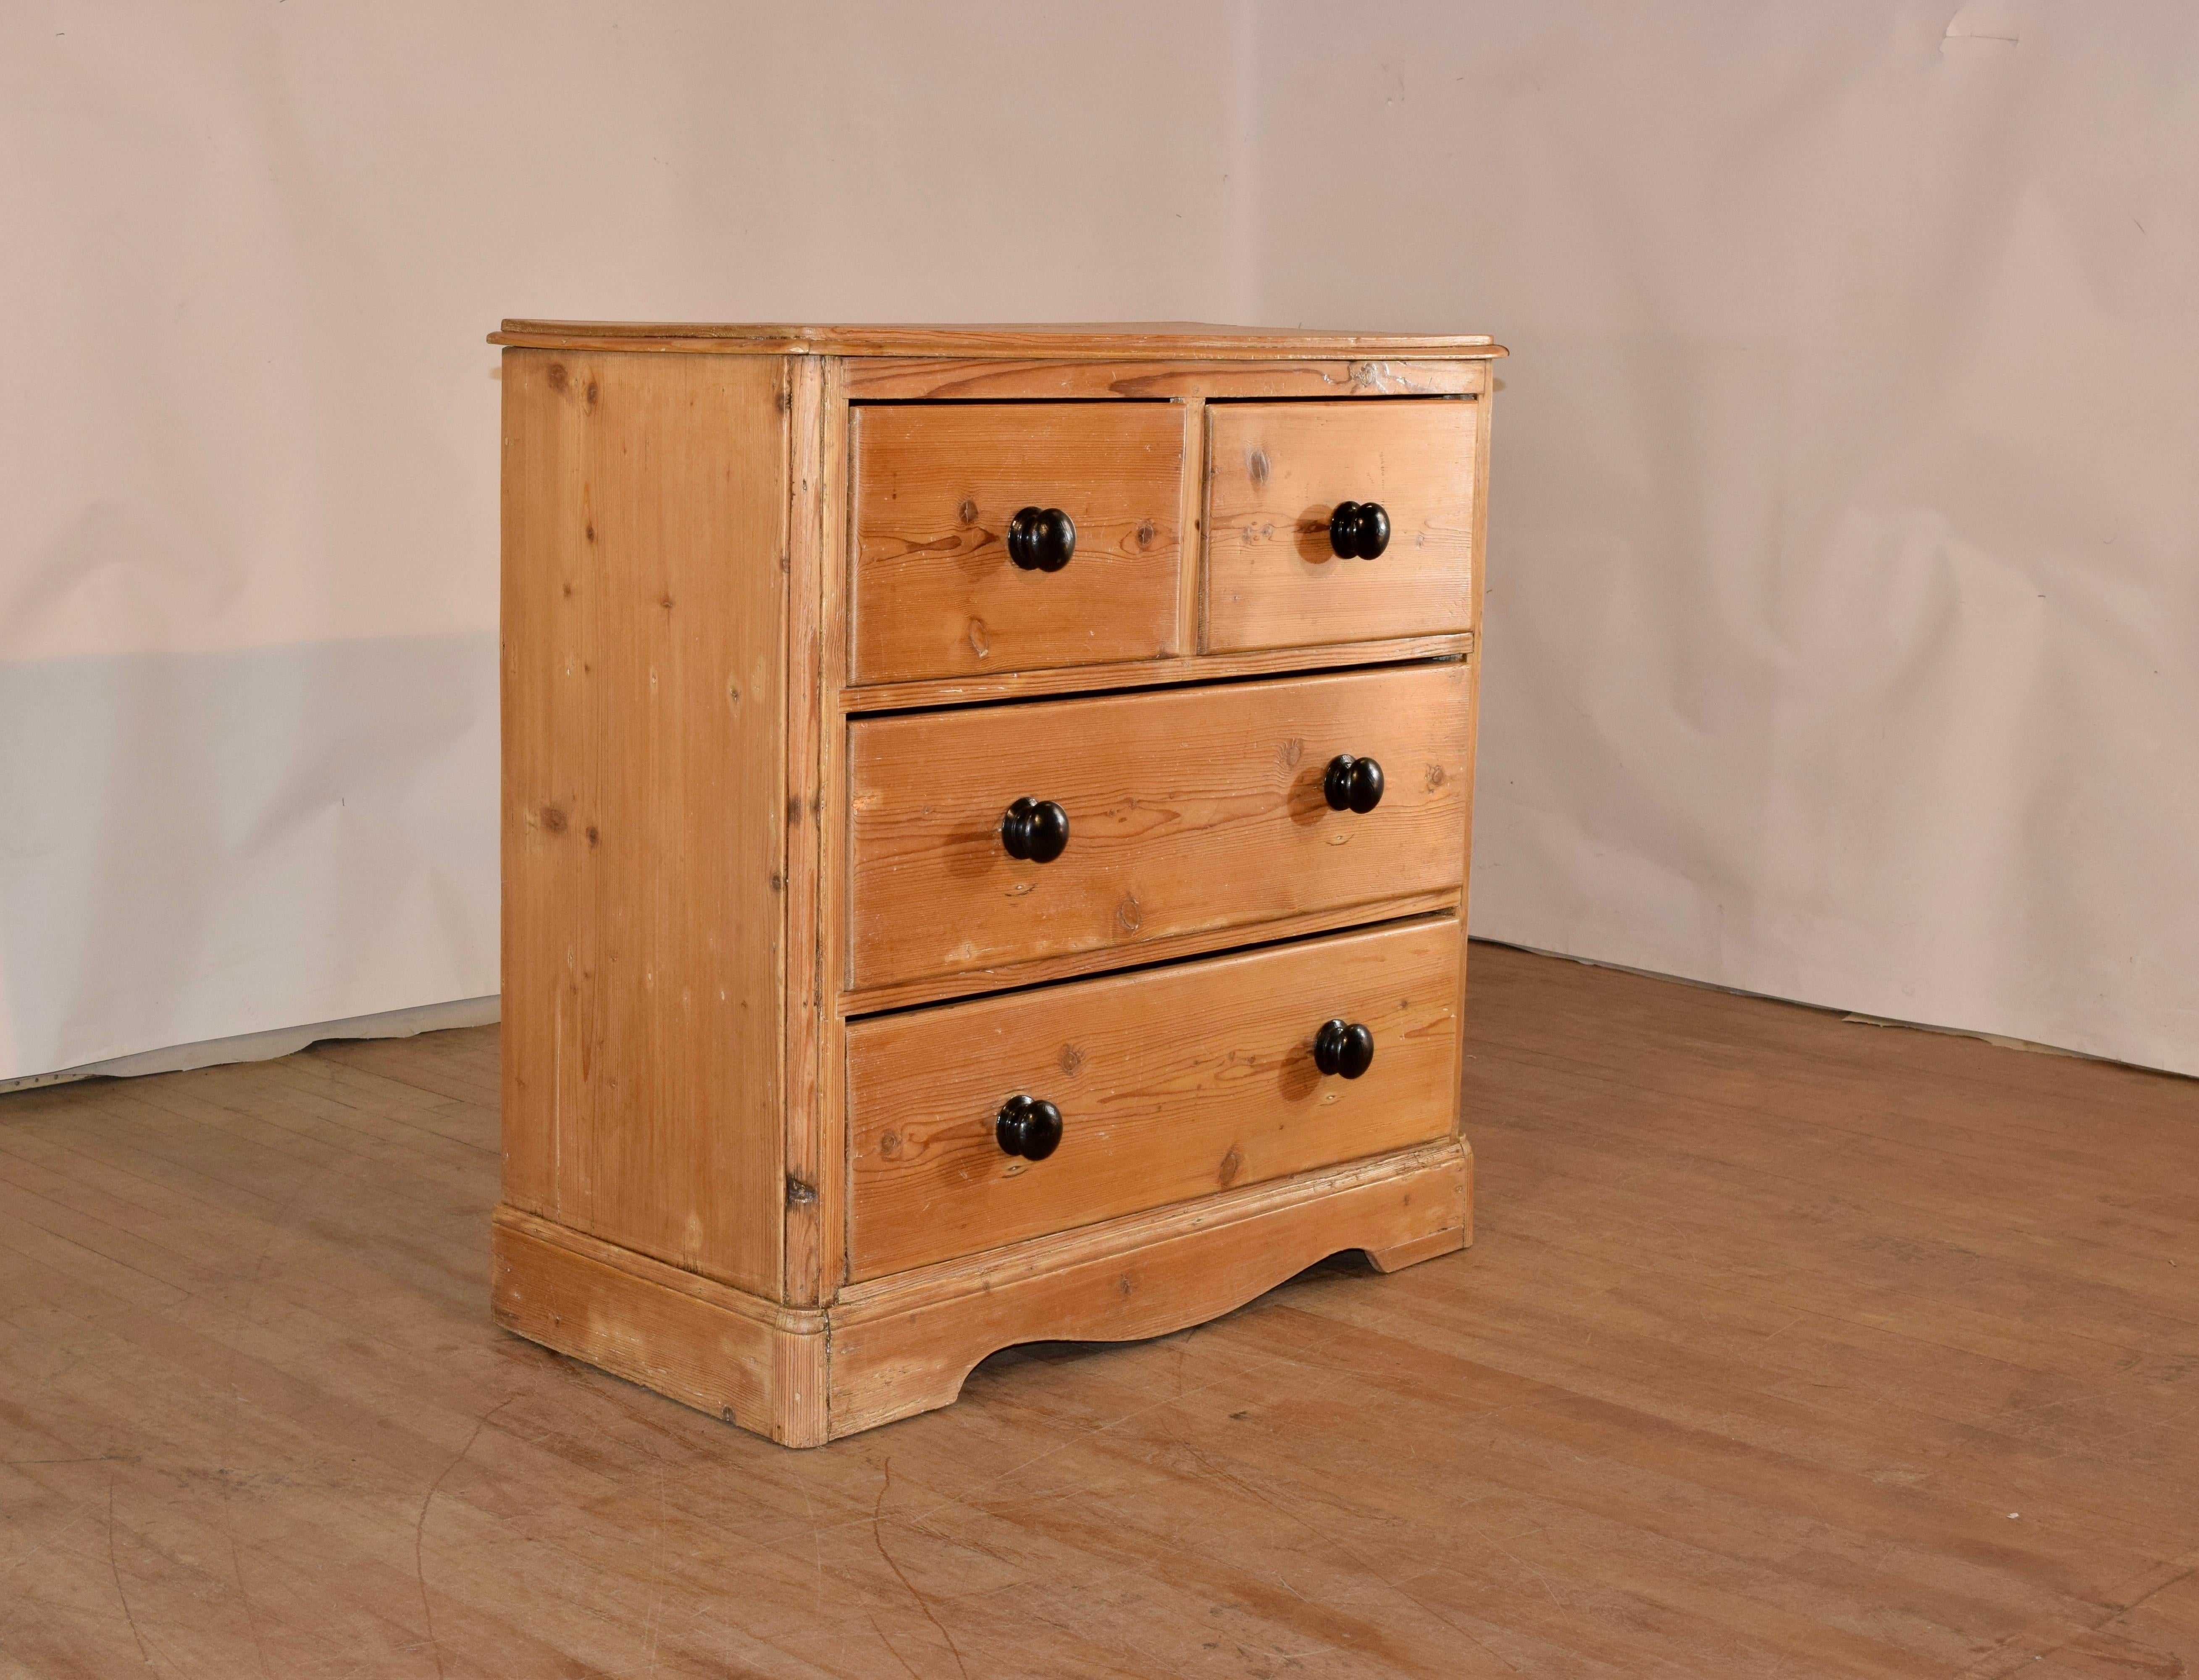 19th century pine chest of drawers with a beveled edge around the top, following down to simple sides and two drawers over two drawers, all over a banded base, with scalloping in the front.  